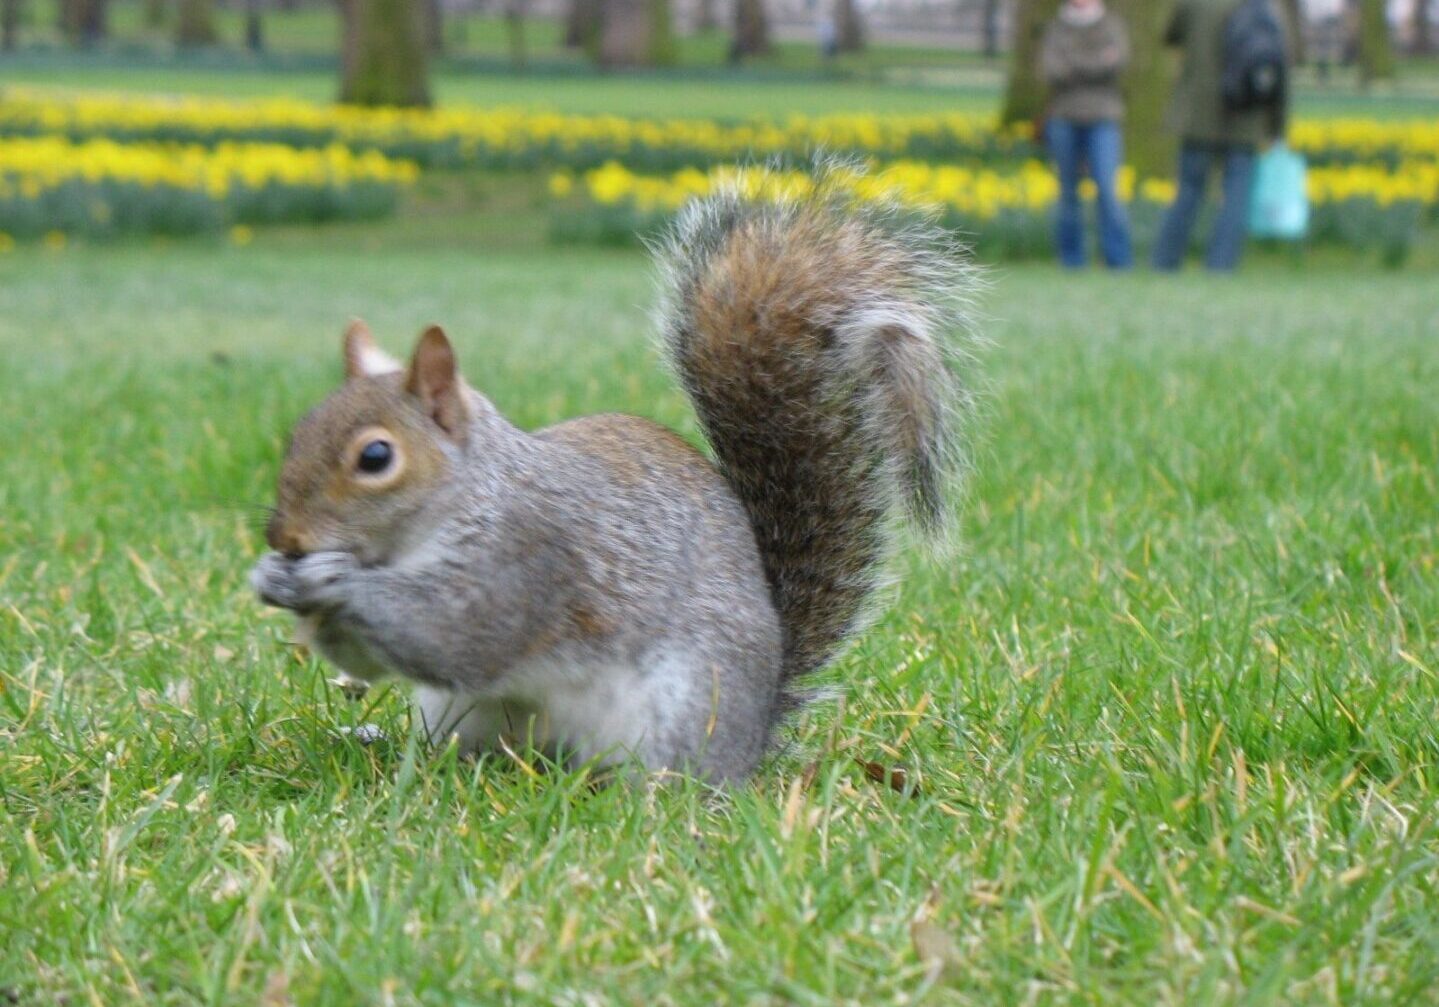 A squirrel is standing in the grass near people.